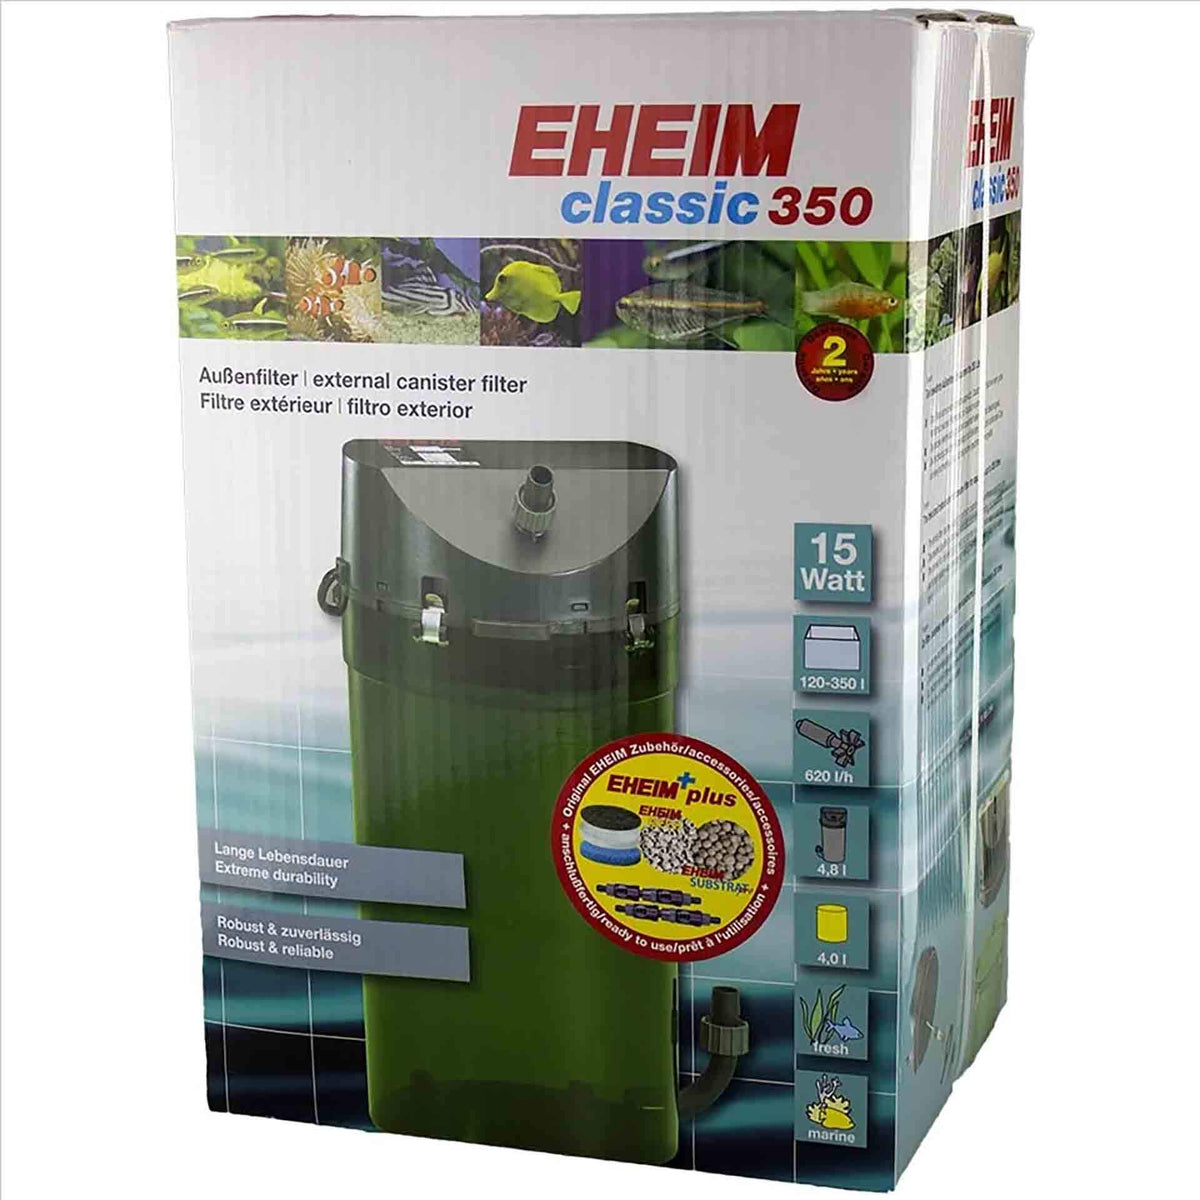 Eheim Classic 350 - 2215 (With Sponge and Bio Media) Canister Filter